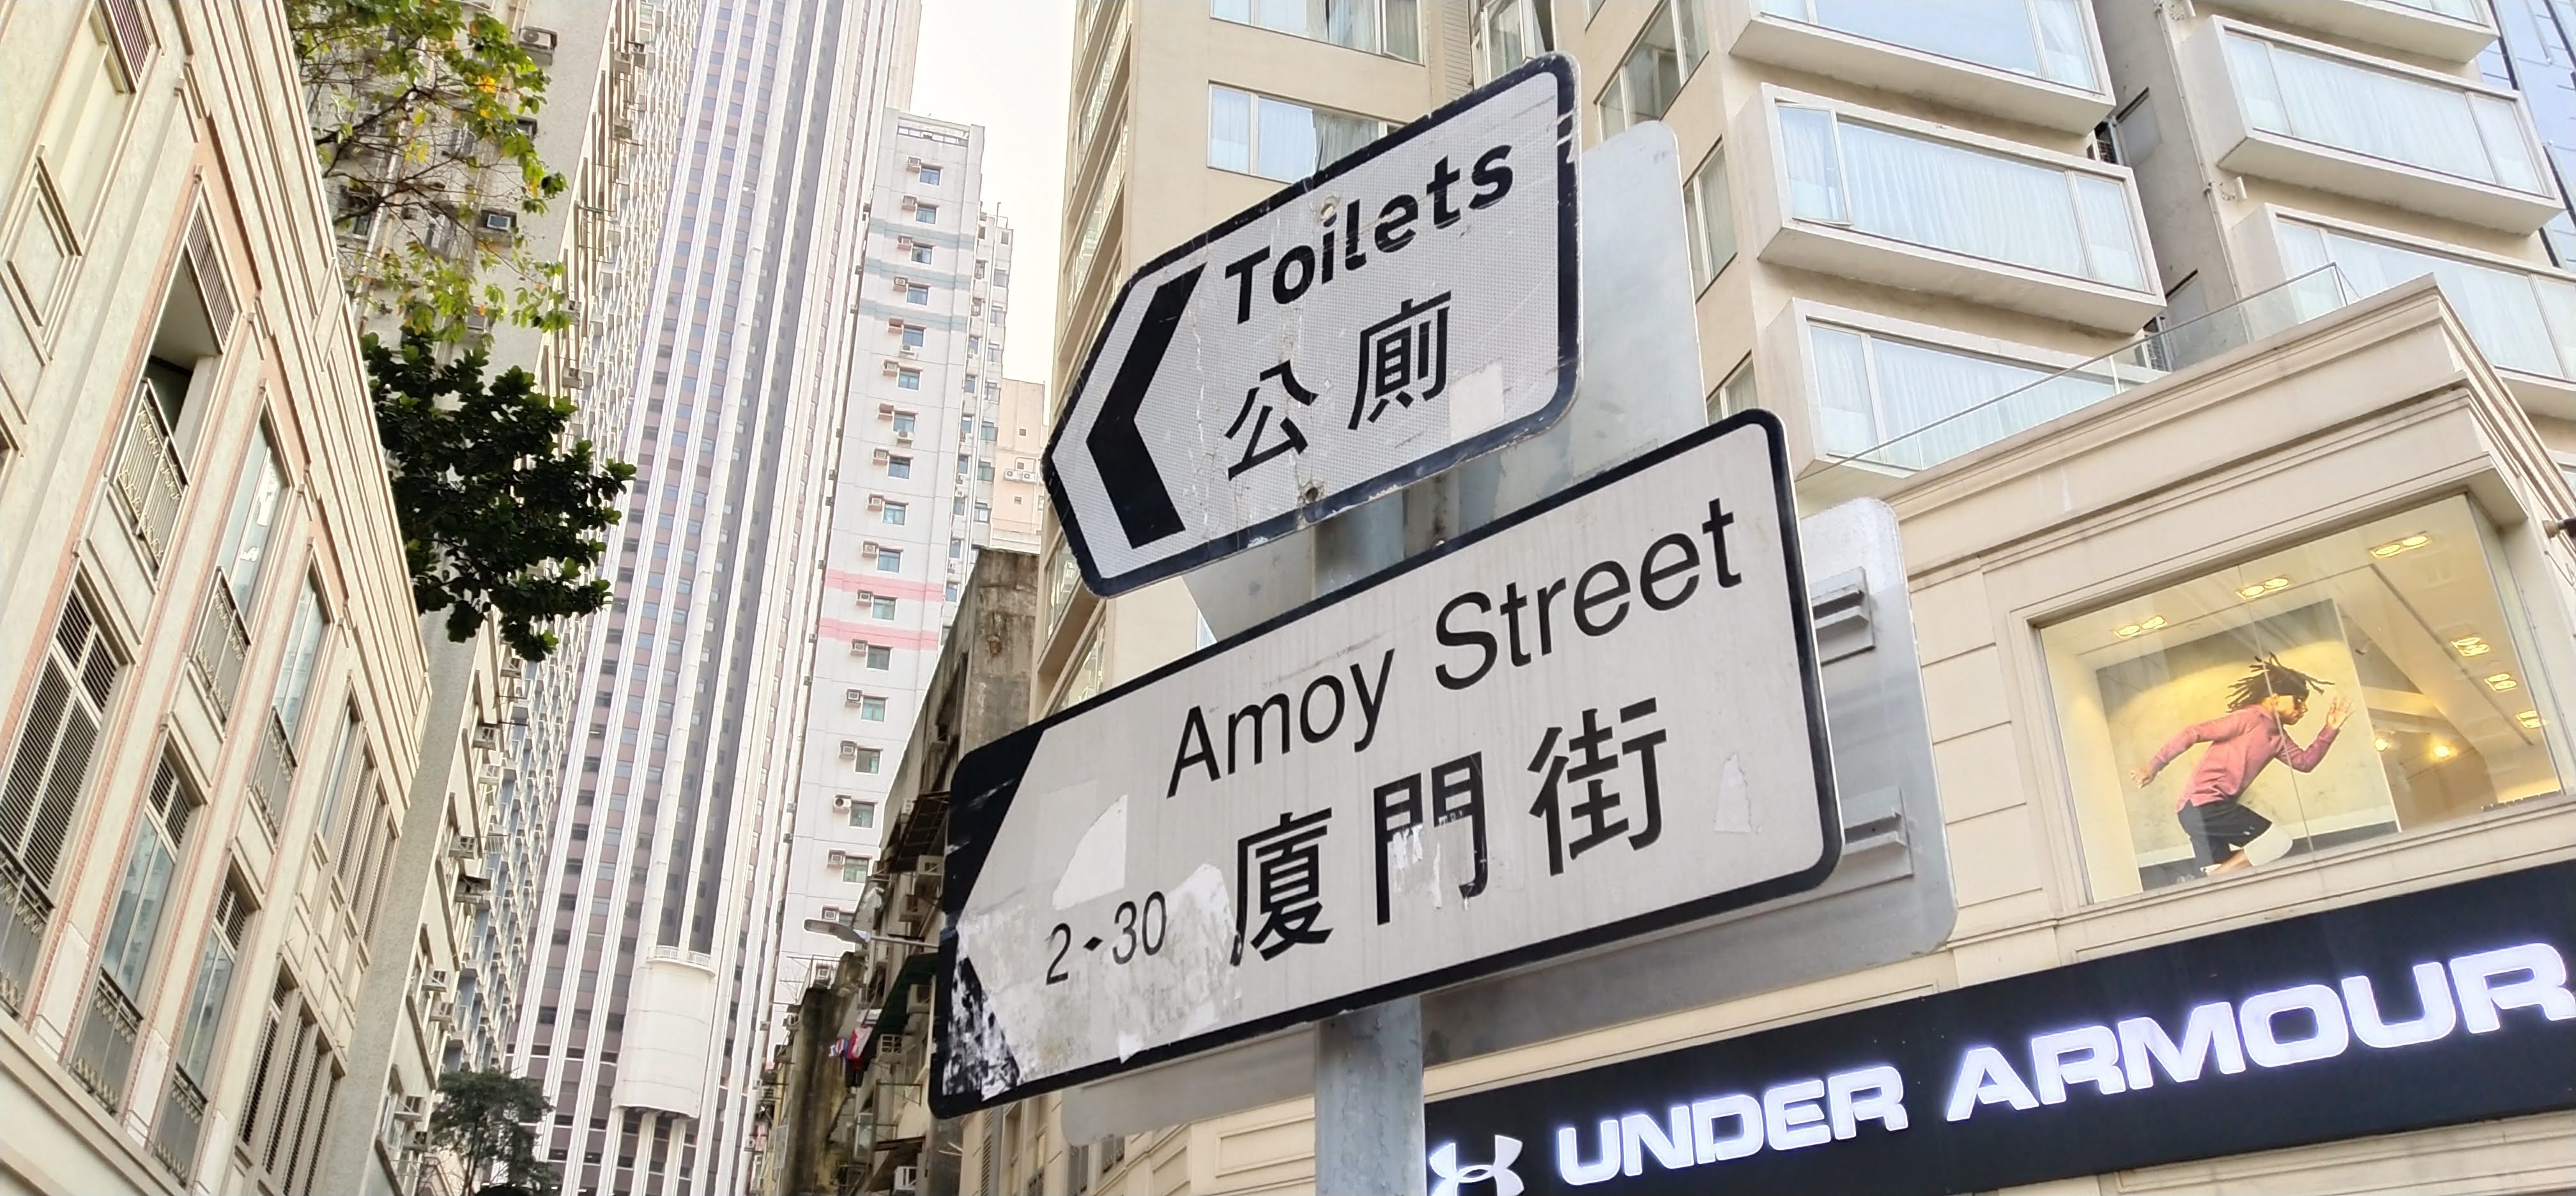 Dent had business relationship with Amoy, a city in Mainland China.